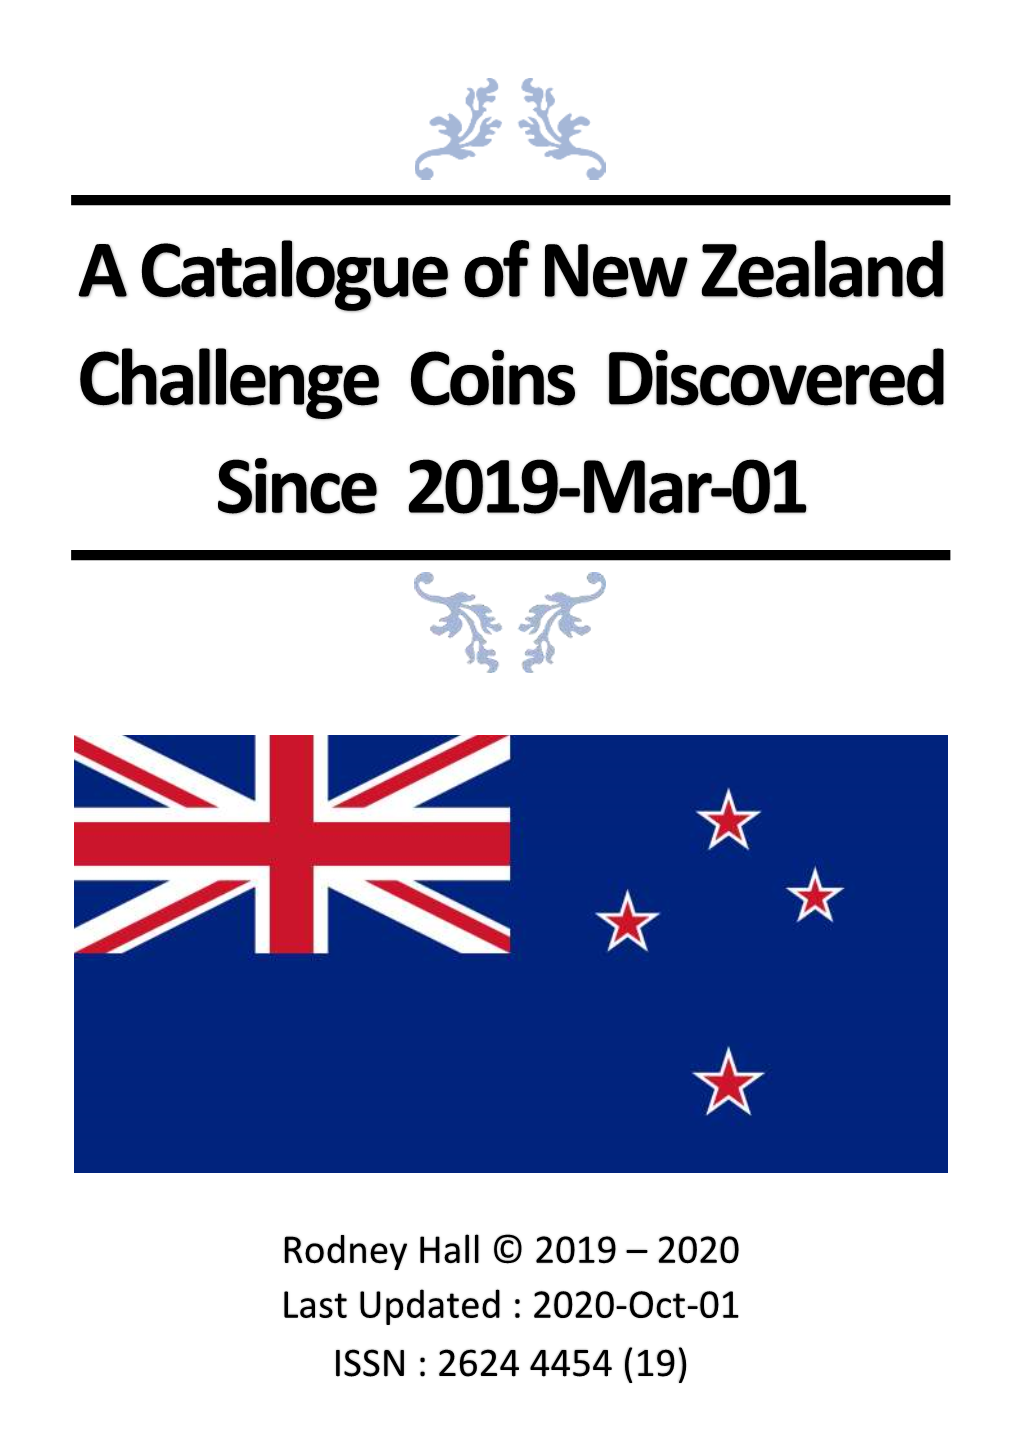 A Catalogue of New Zealand Challenge Coins Discovered Since 2019-Mar-01